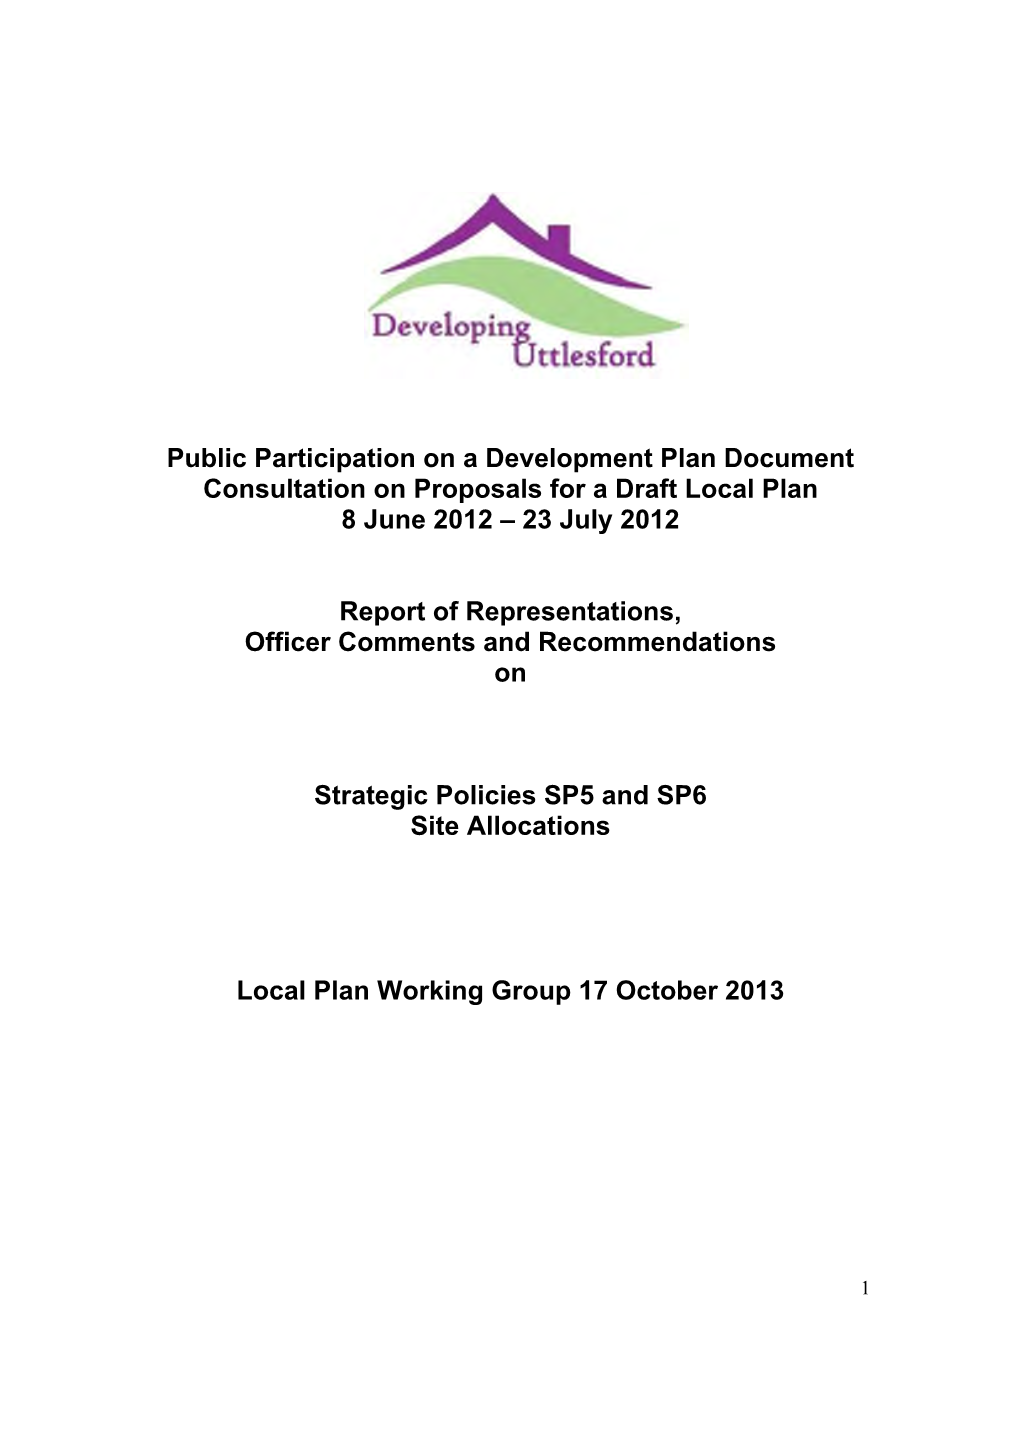 Public Participation on a Development Plan Document Consultation on Proposals for a Draft Local Plan 8 June 2012 – 23 July 2012